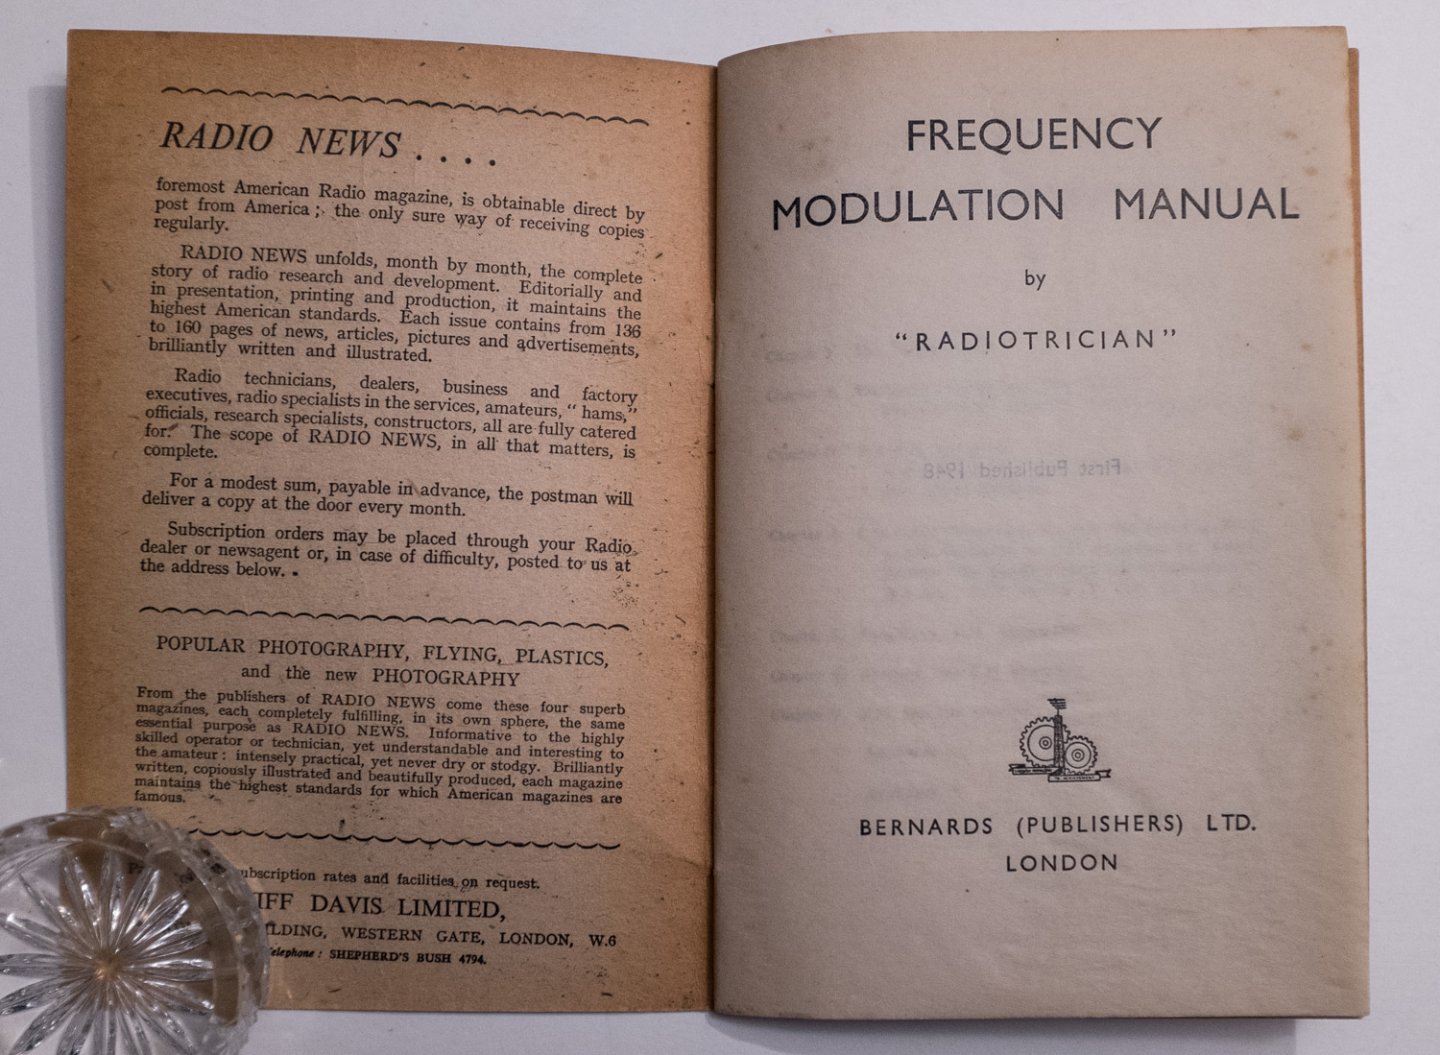 Radiotrician - Frequency modulation manual